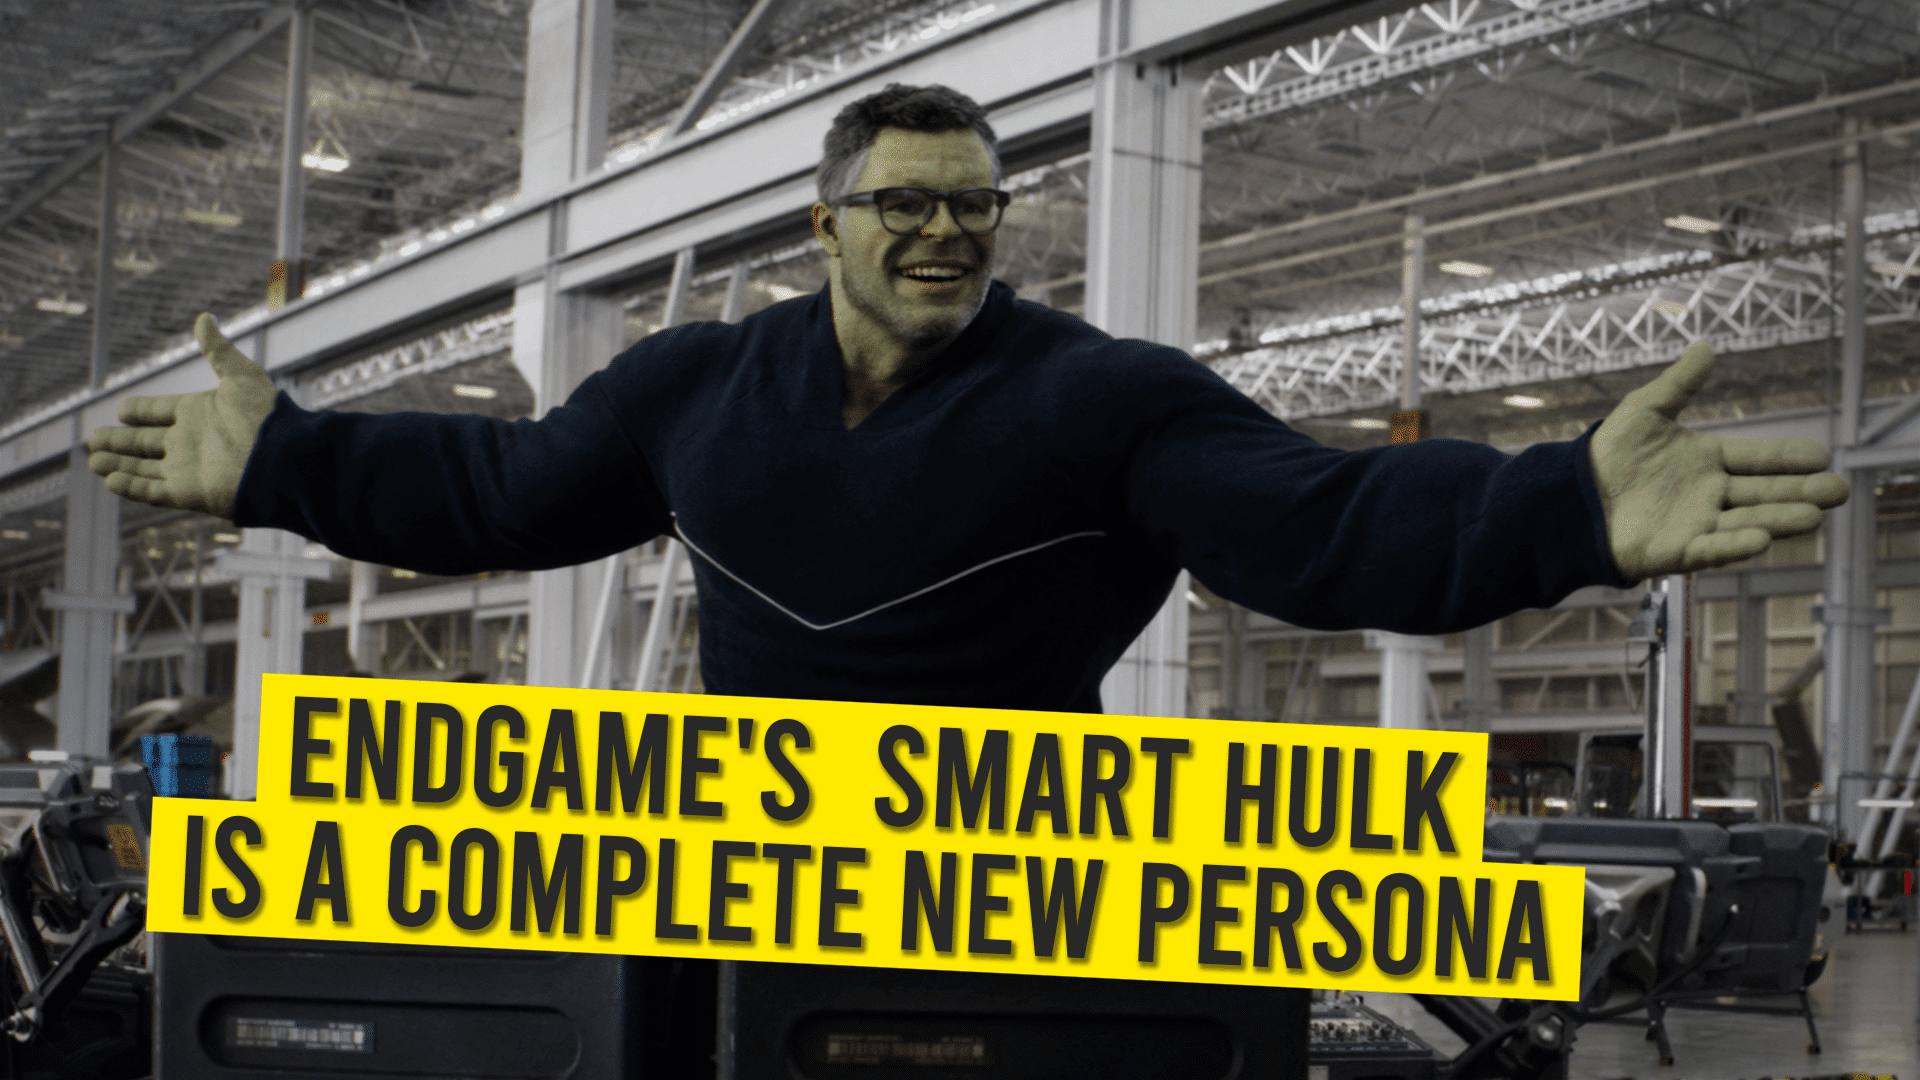 Endgame’s Smart Hulk Is A Complete New Persona